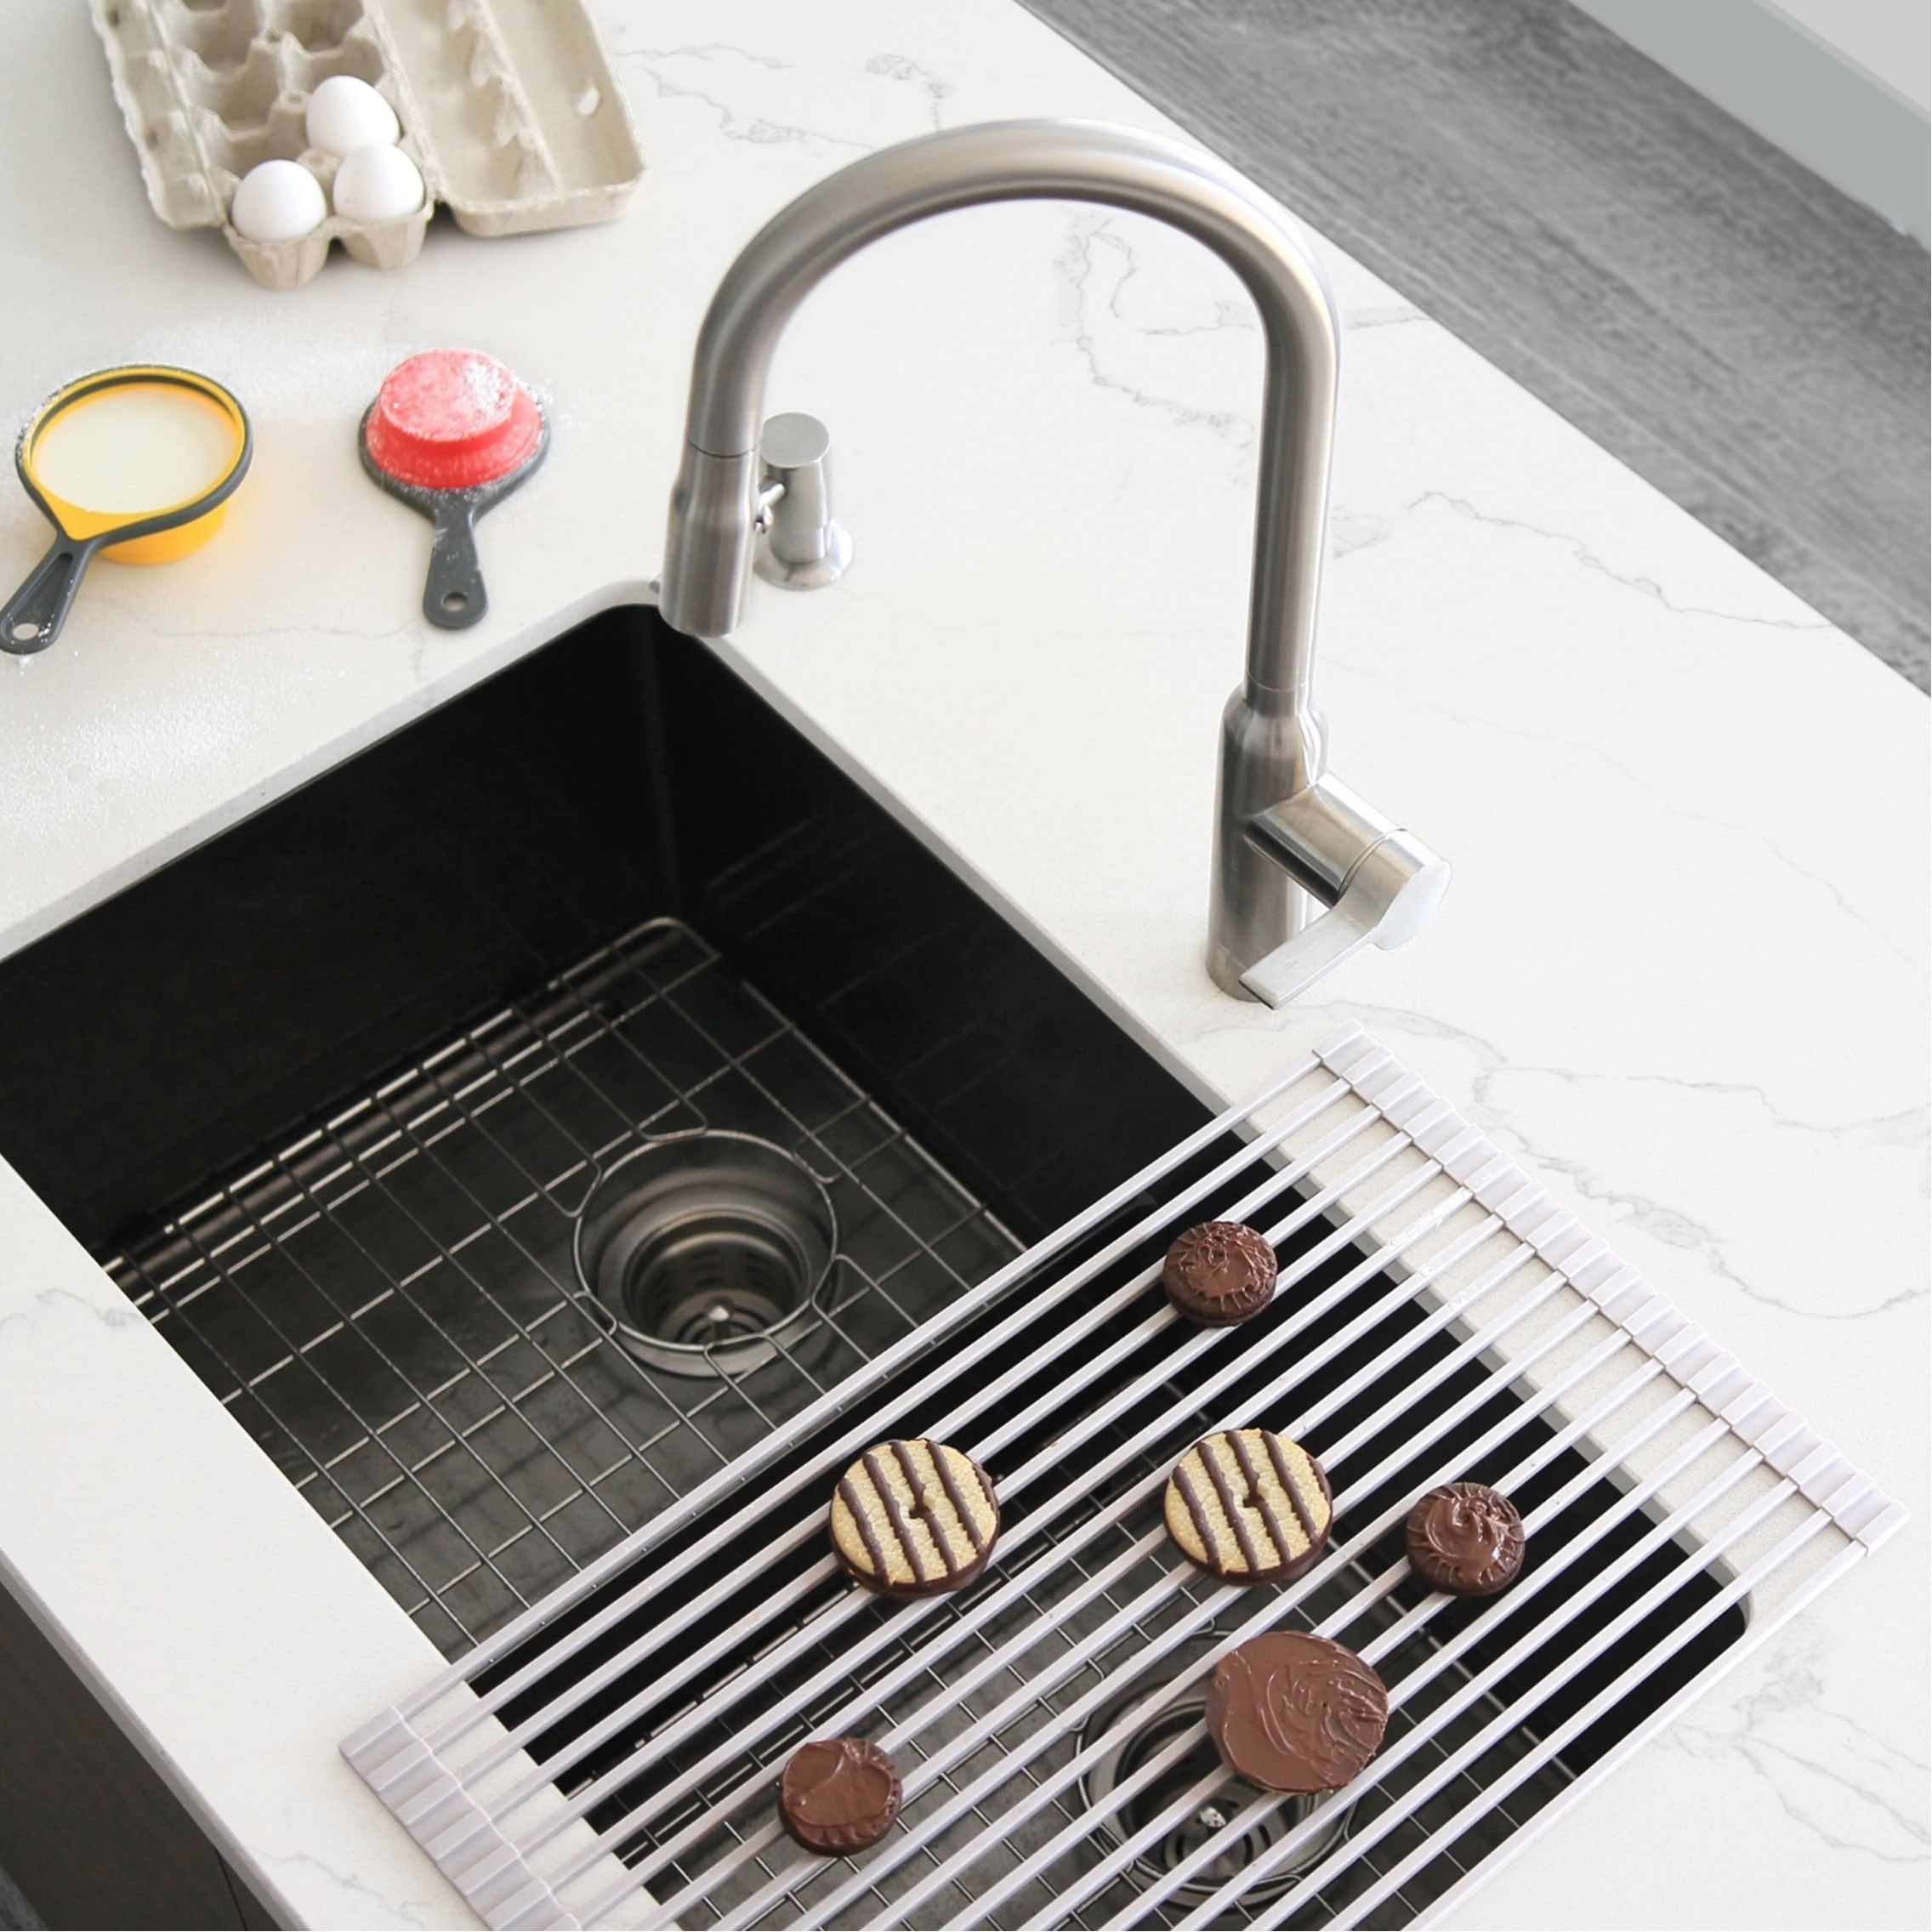 https://ak1.ostkcdn.com/images/products/is/images/direct/b1e27ac09f31f675a792a87e21072e915a9079af/STYLISH-Multipurpose-Over-Sink-Roll-Up-Dish-Drying-Rack.jpg